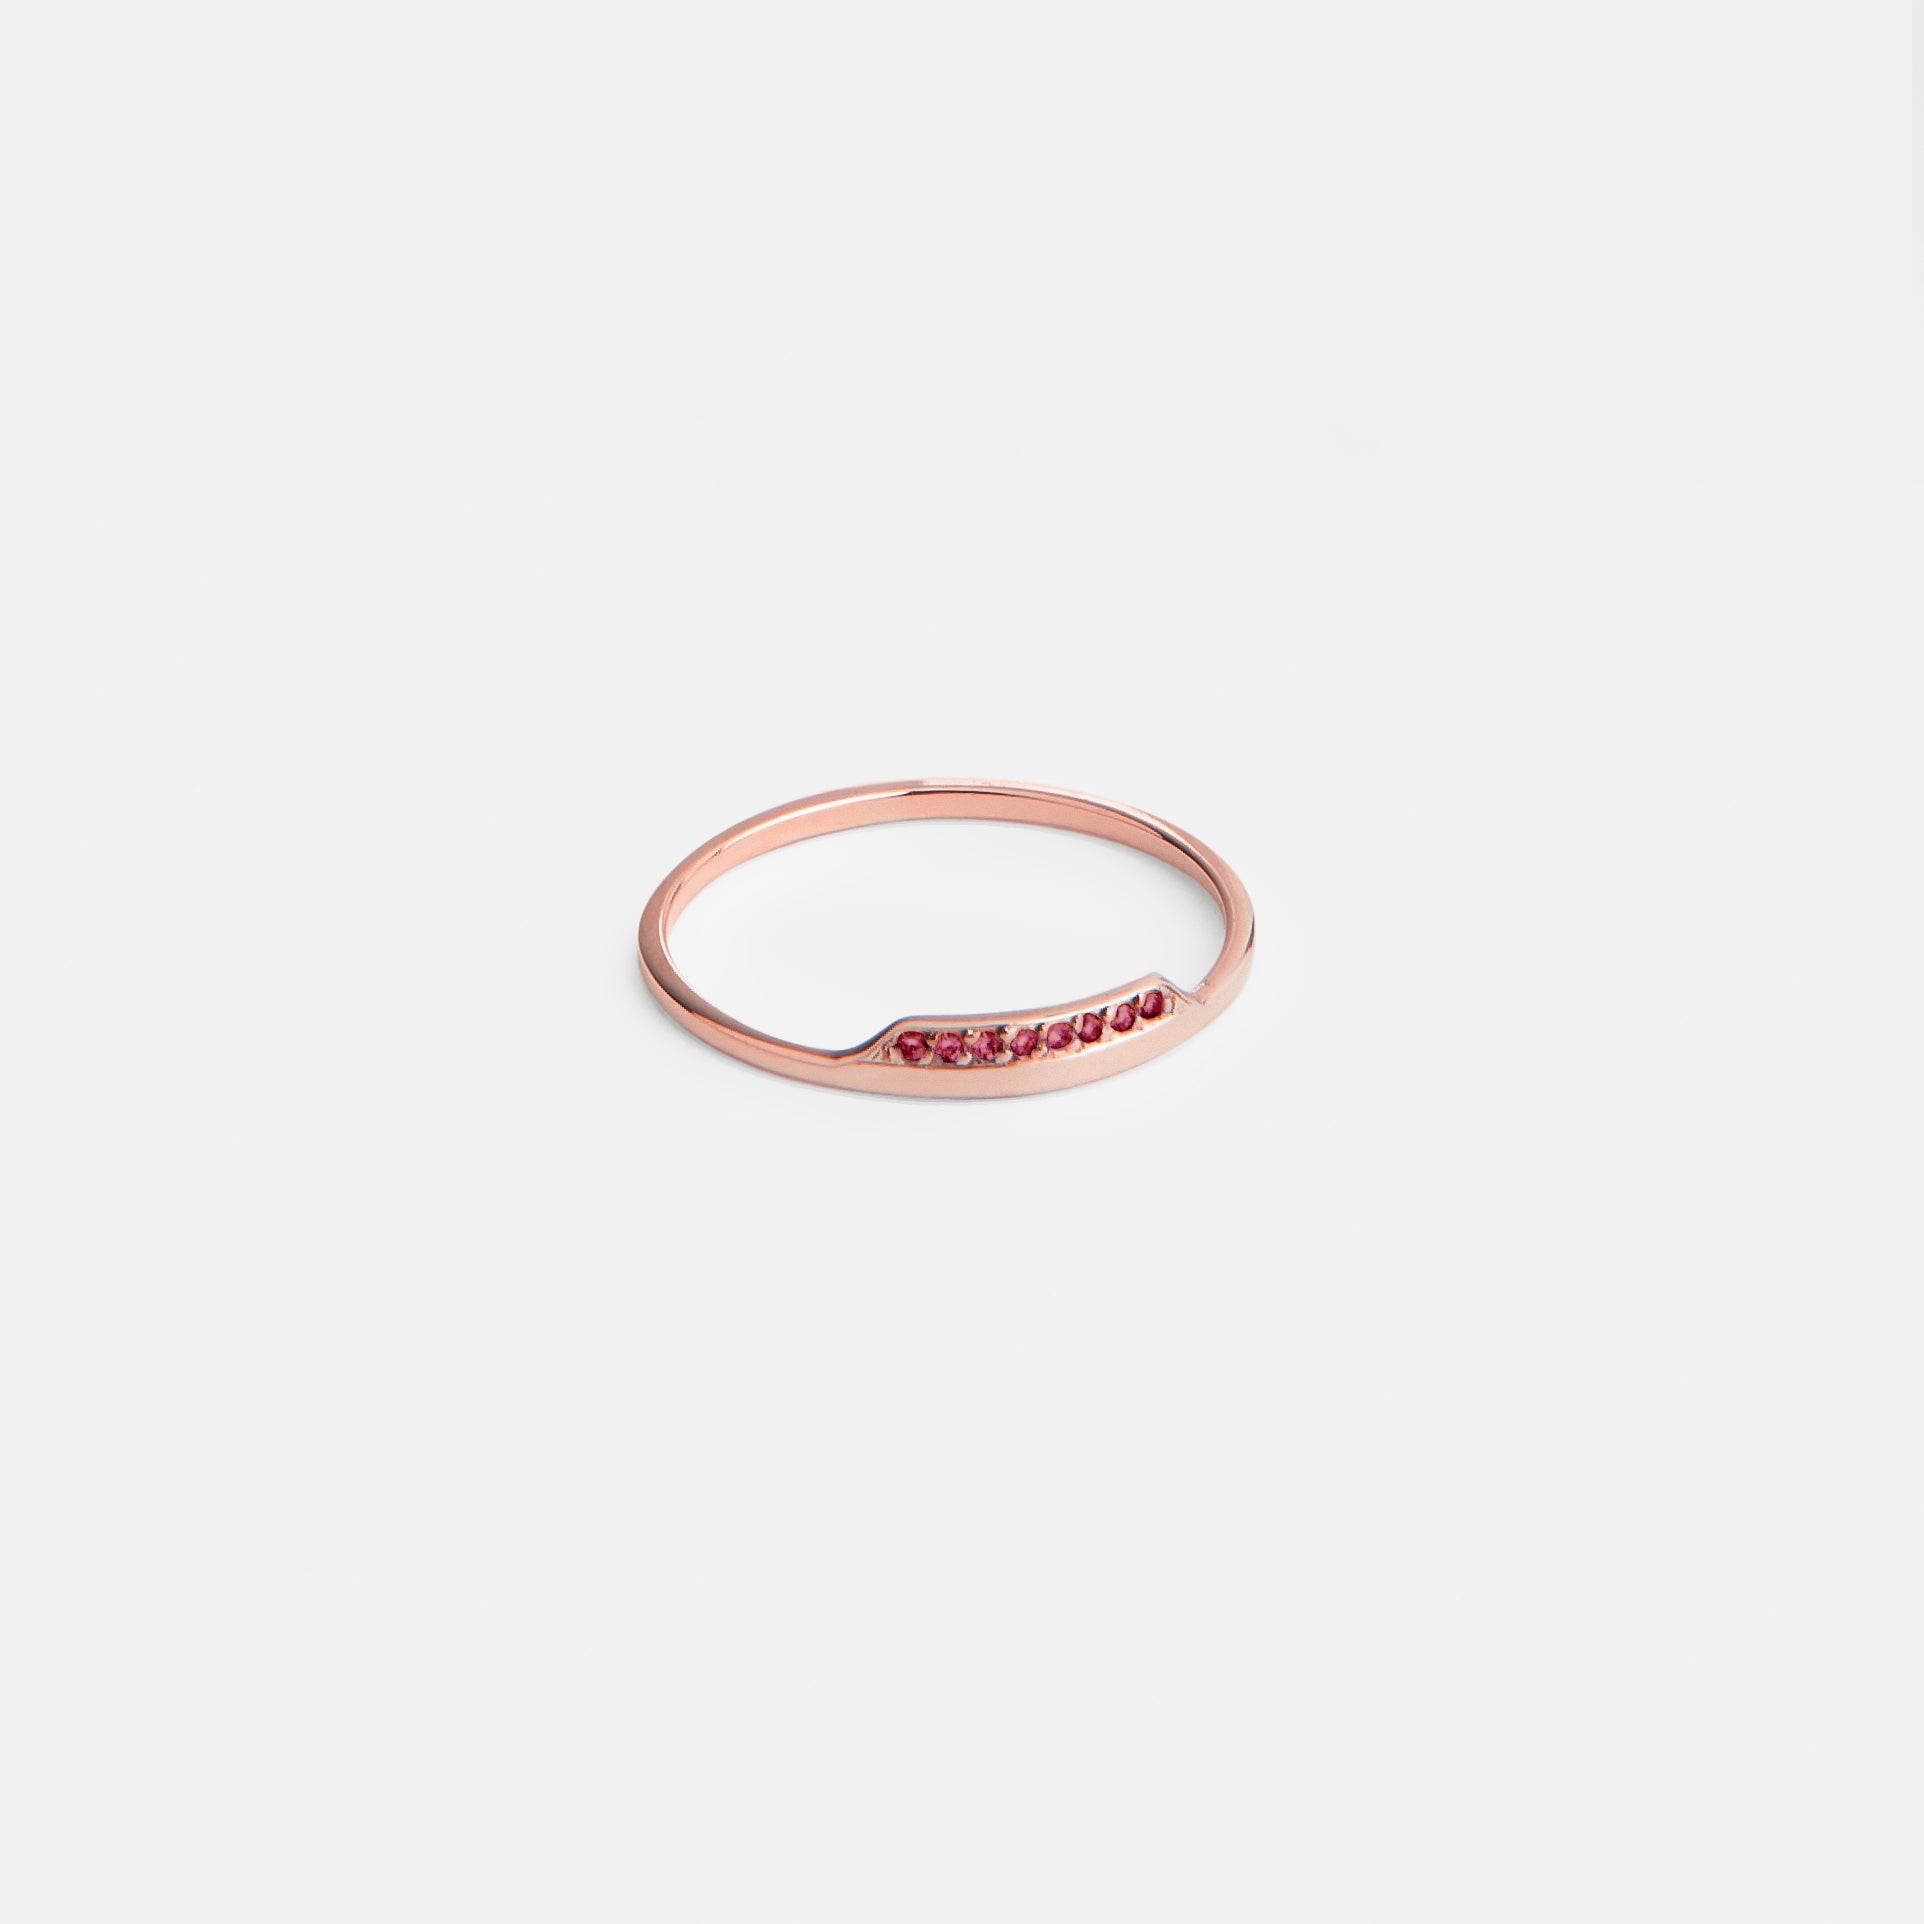 Salo Thin Ring in 14k Rose Gold set with Rubies By SHW Fine Jewelry NYC